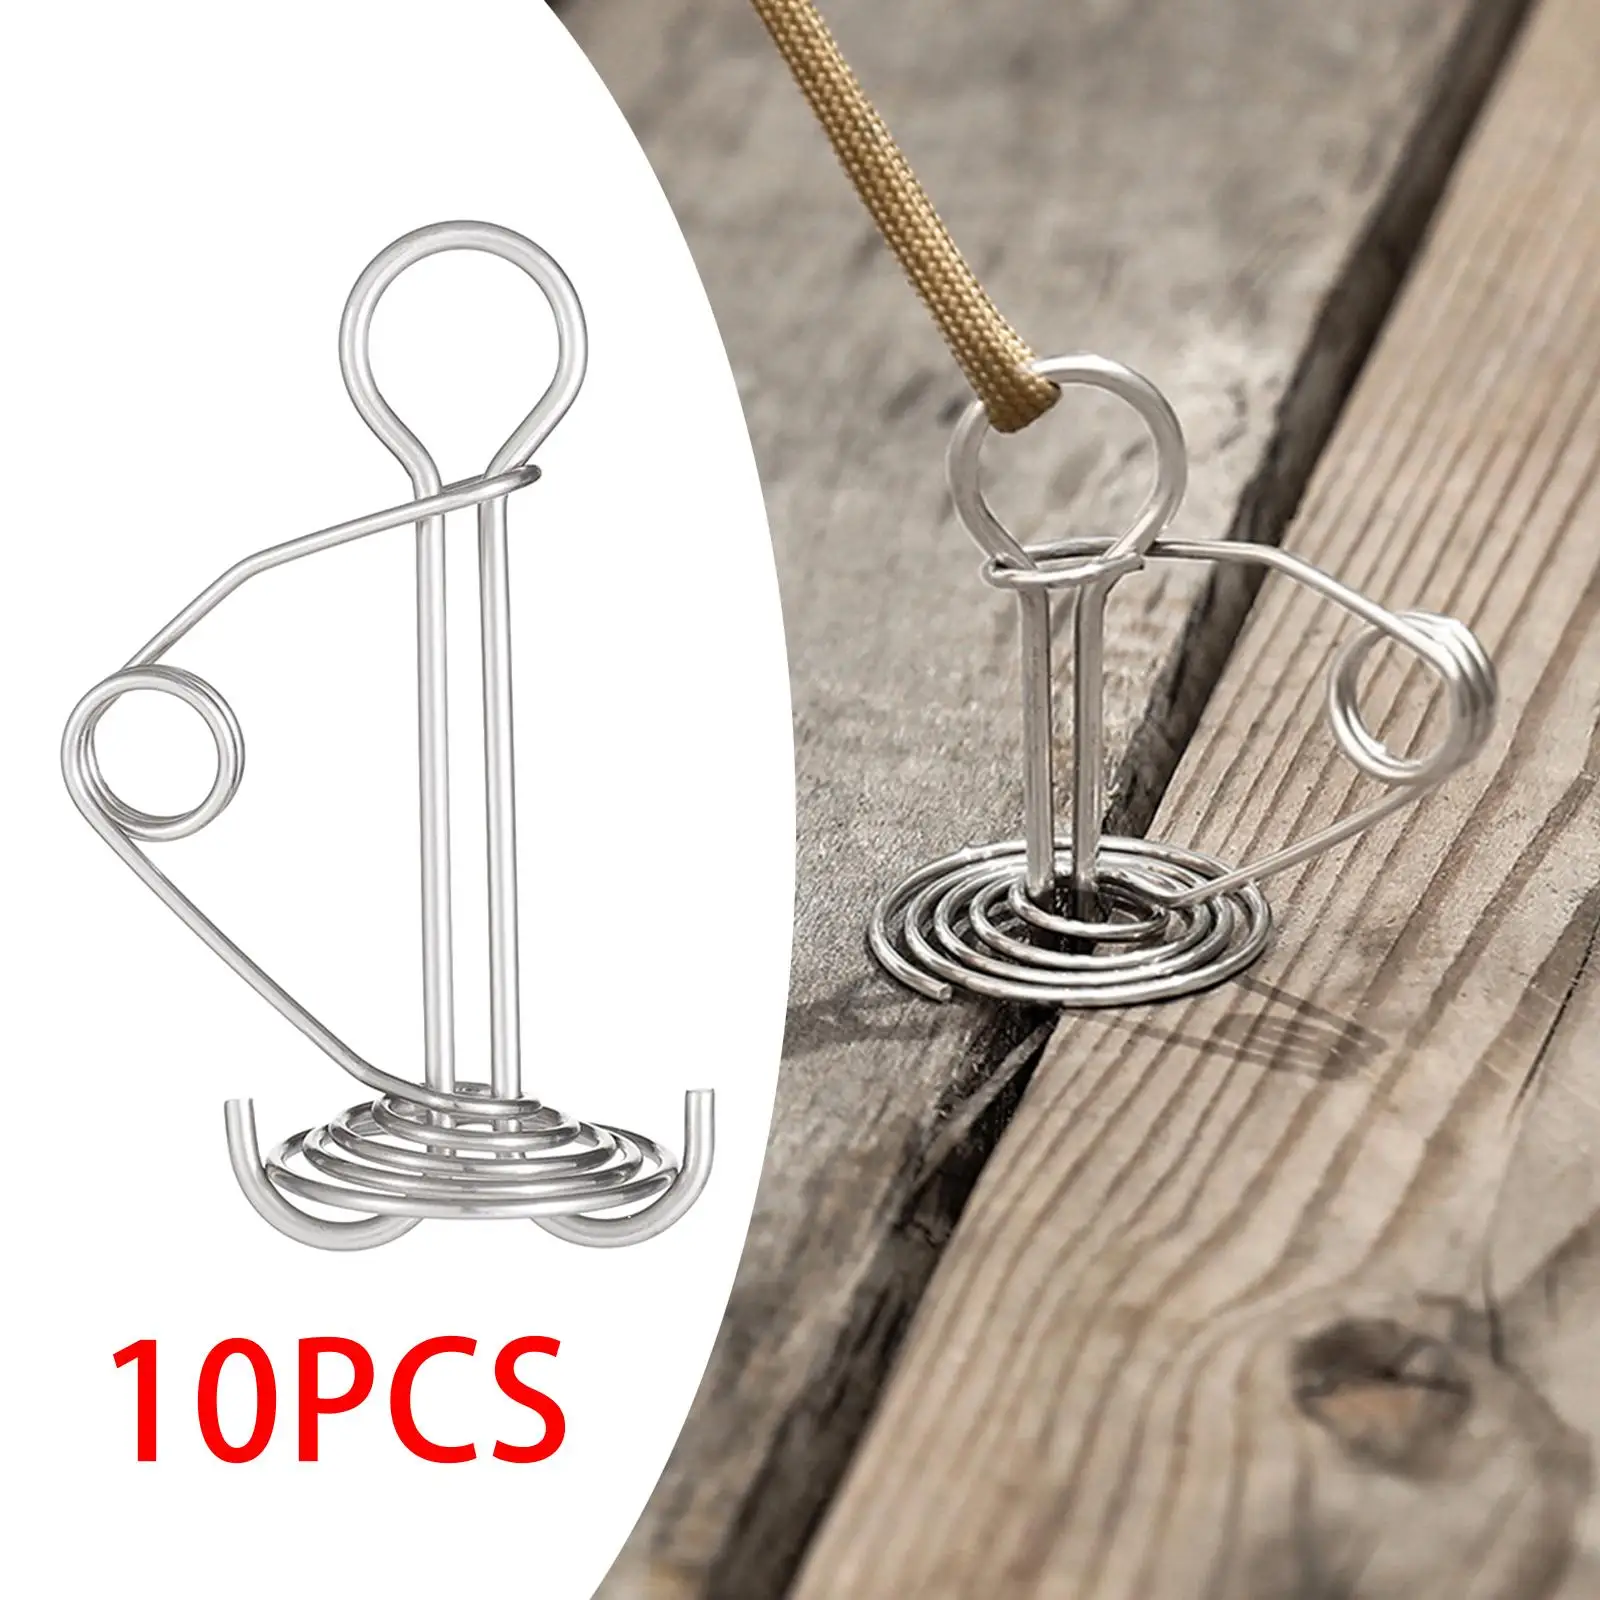 10PCS Stainless Steel Spring Octopus Deck Peg Spiral Shaped Durable Rope Buckle Tent Hooks Board Pegs for Camping Hiking